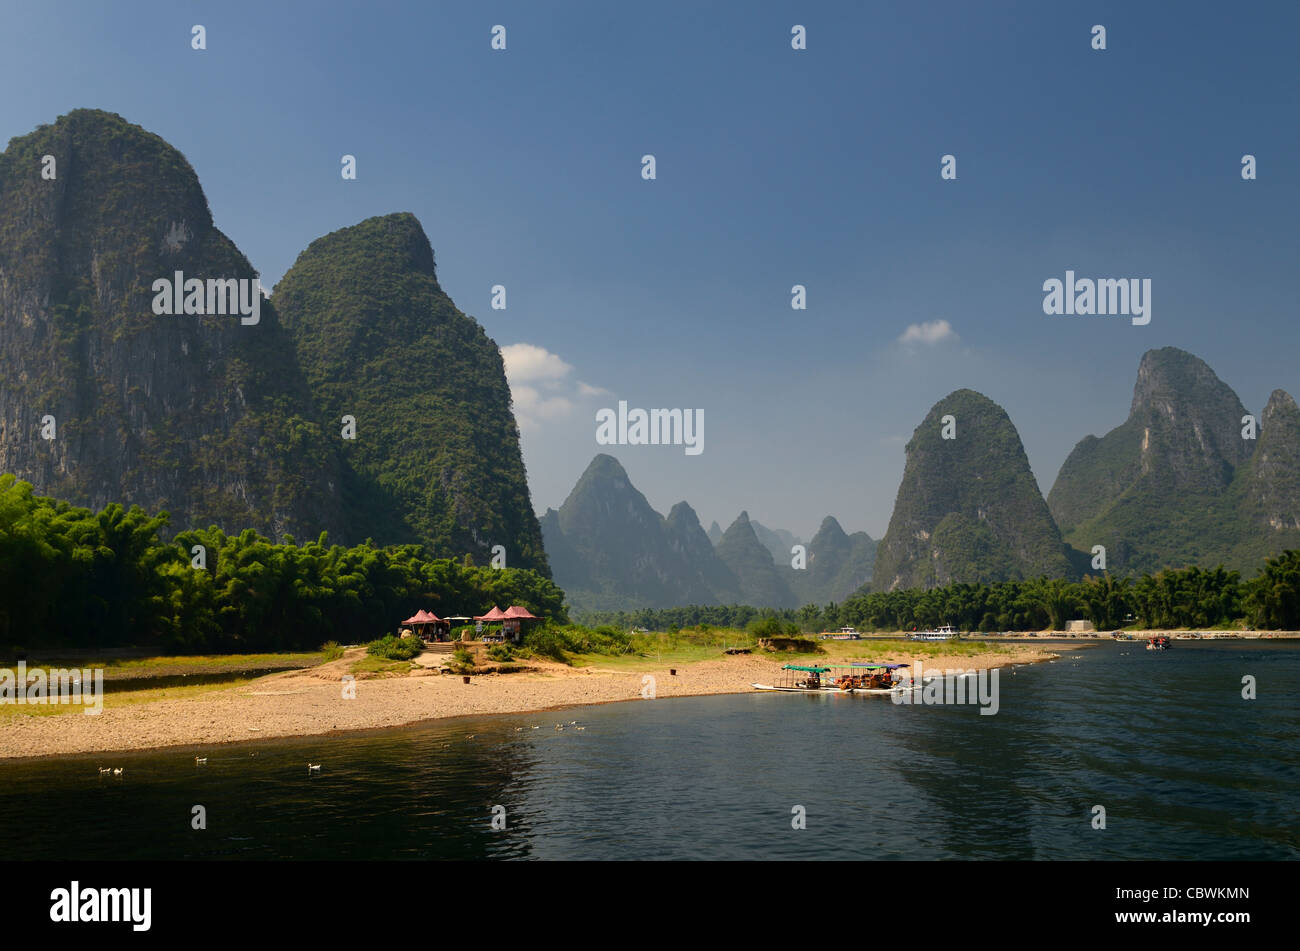 Boats and rest stop on the Li river with tall karst formations receding into the distance Peoples Republic of China Stock Photo